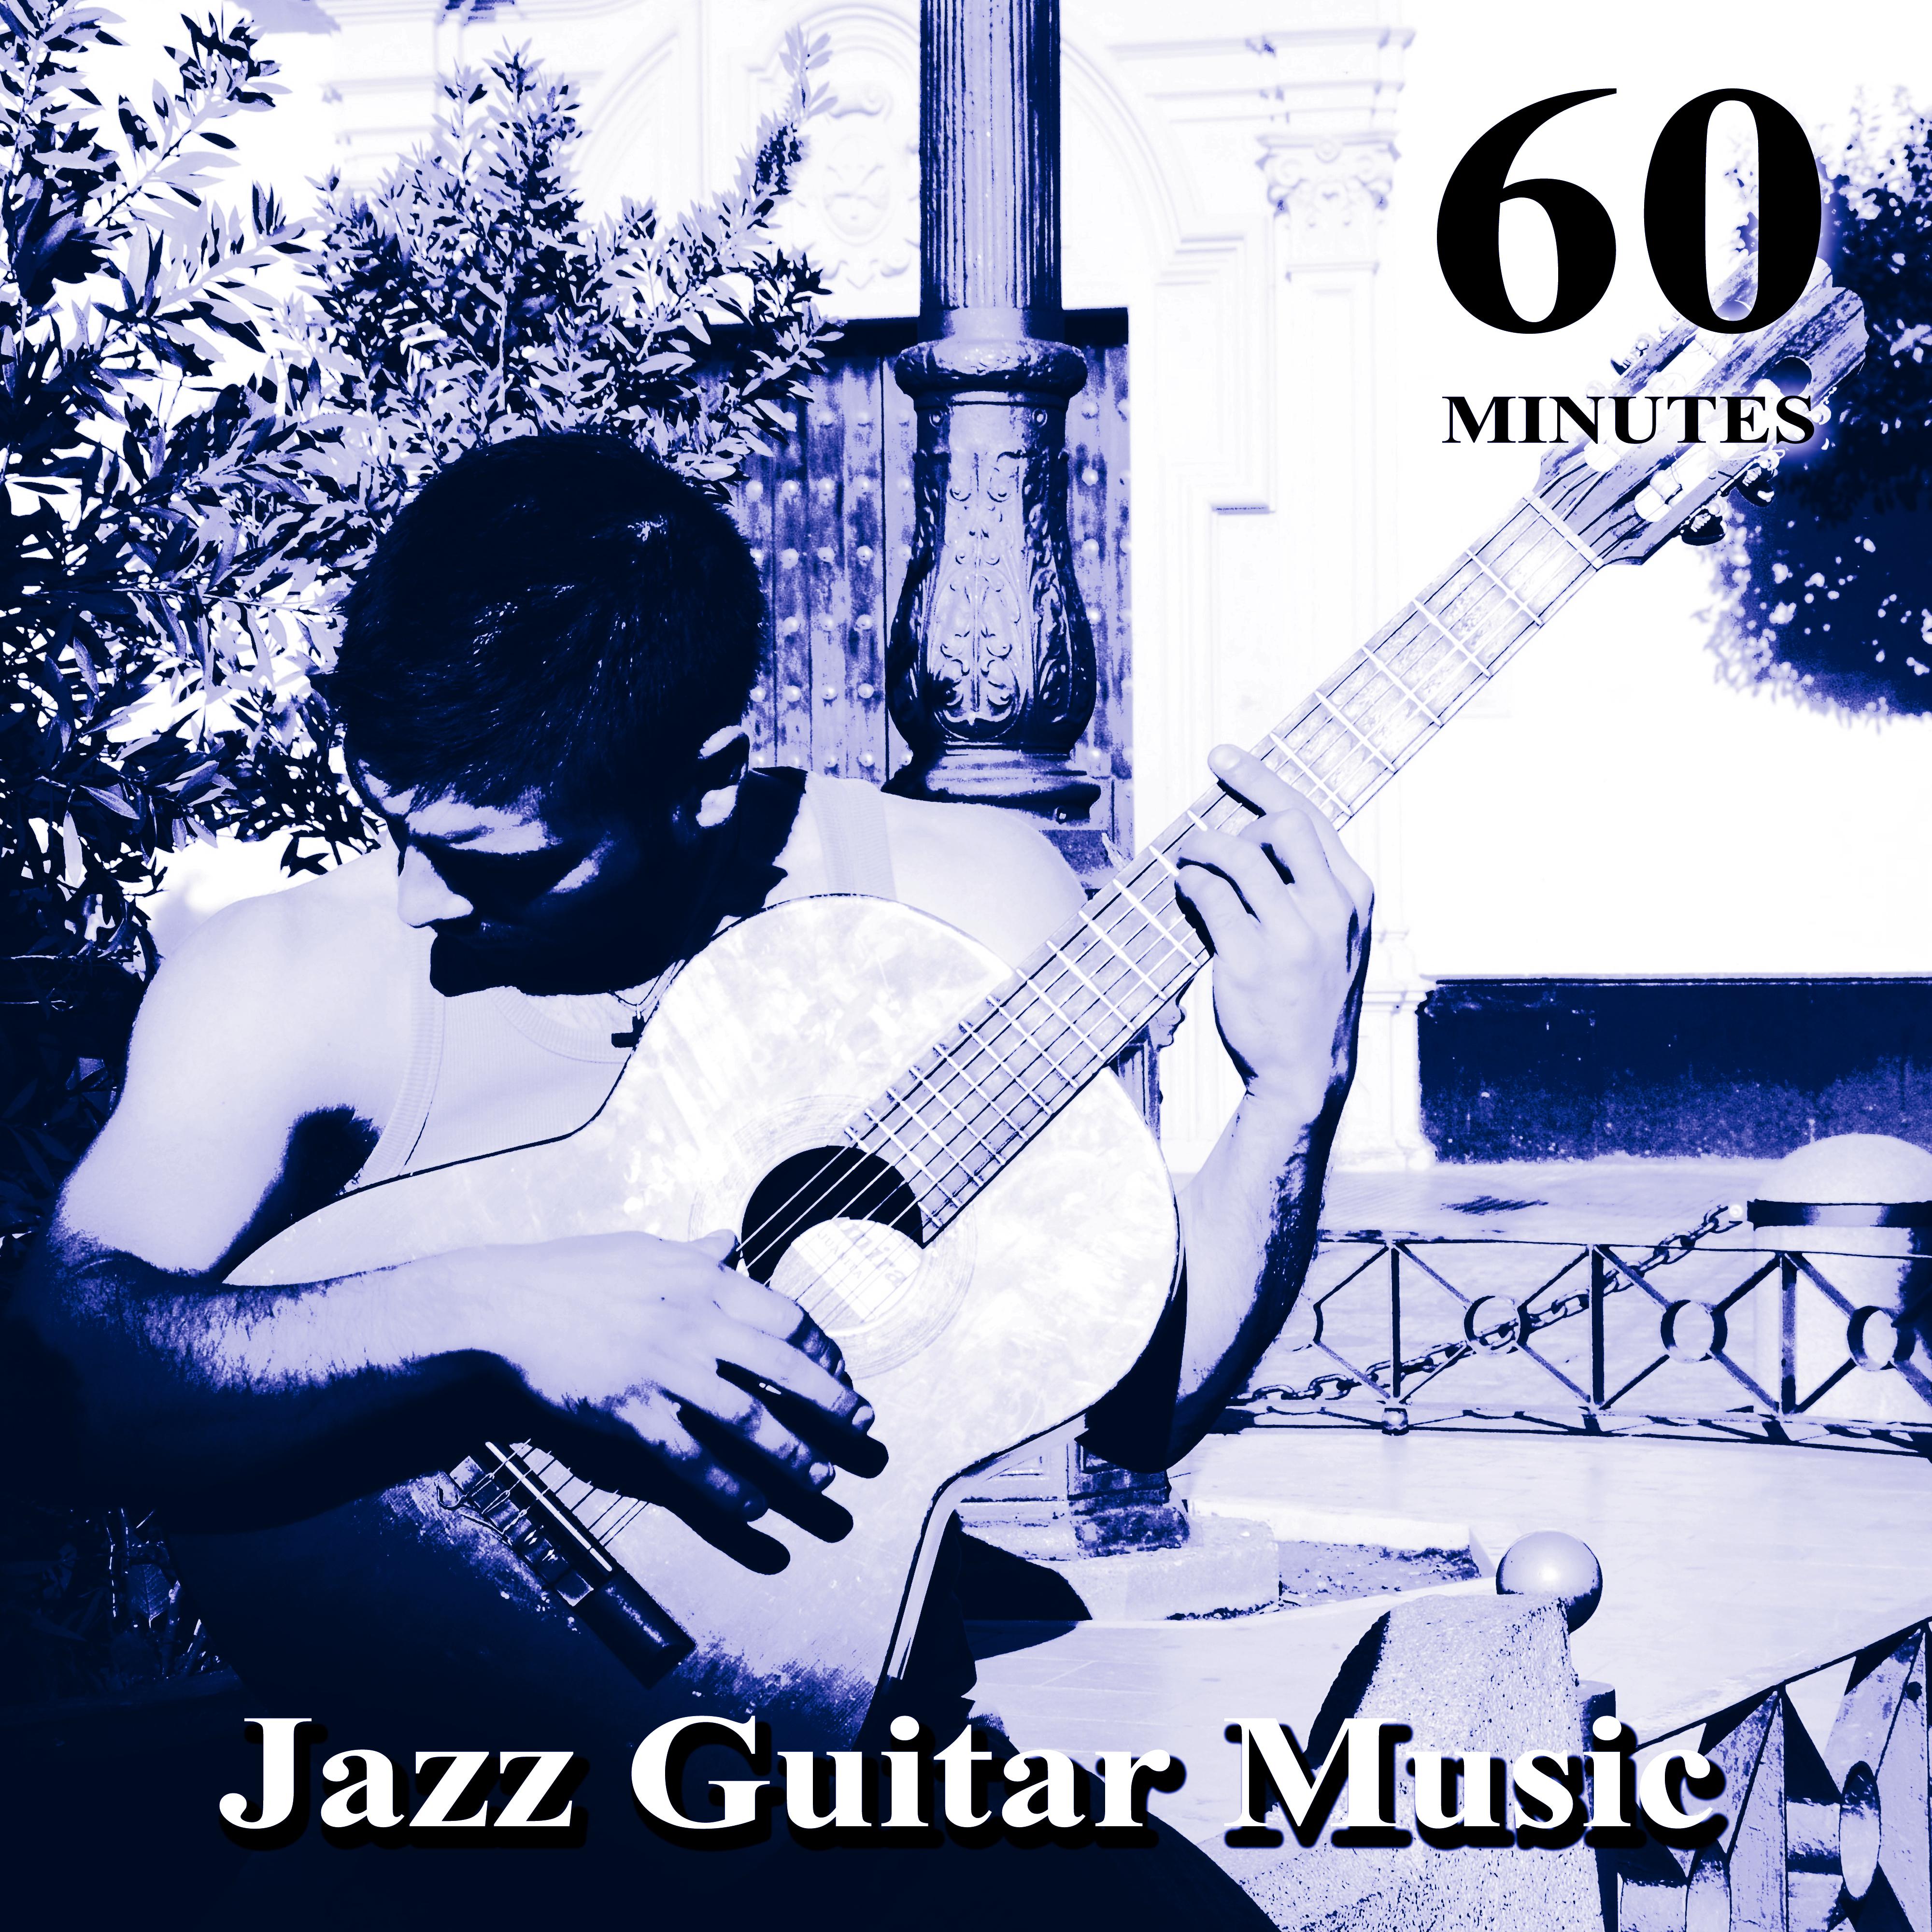 60 Minutes Jazz Guitar Music – Best Instrumental Music, Easy Listening, Smooth Jazz,  Simply Special Jazz, Soft Background Music, Chillin' Classical Guitar, Mood & Romantic Music